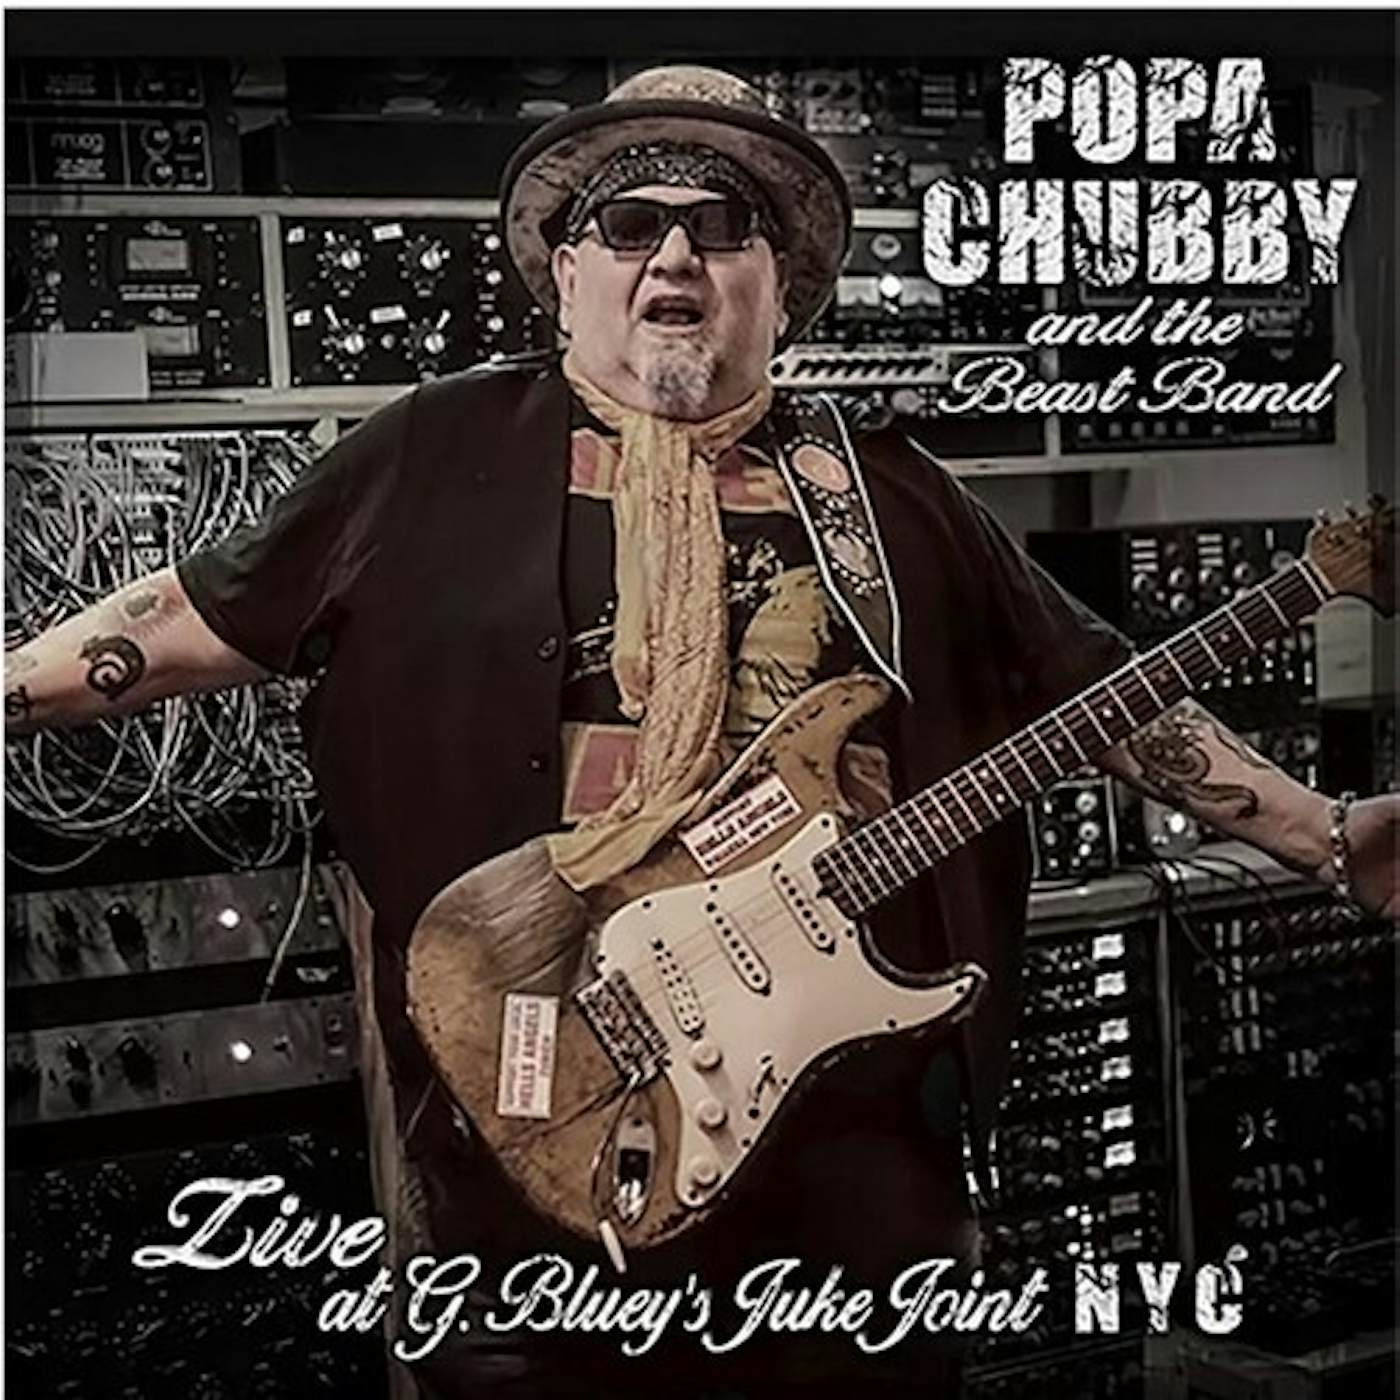 POPA CHUBBY AND THE BEAST BAND LIVE AT G. BLUEYS CD